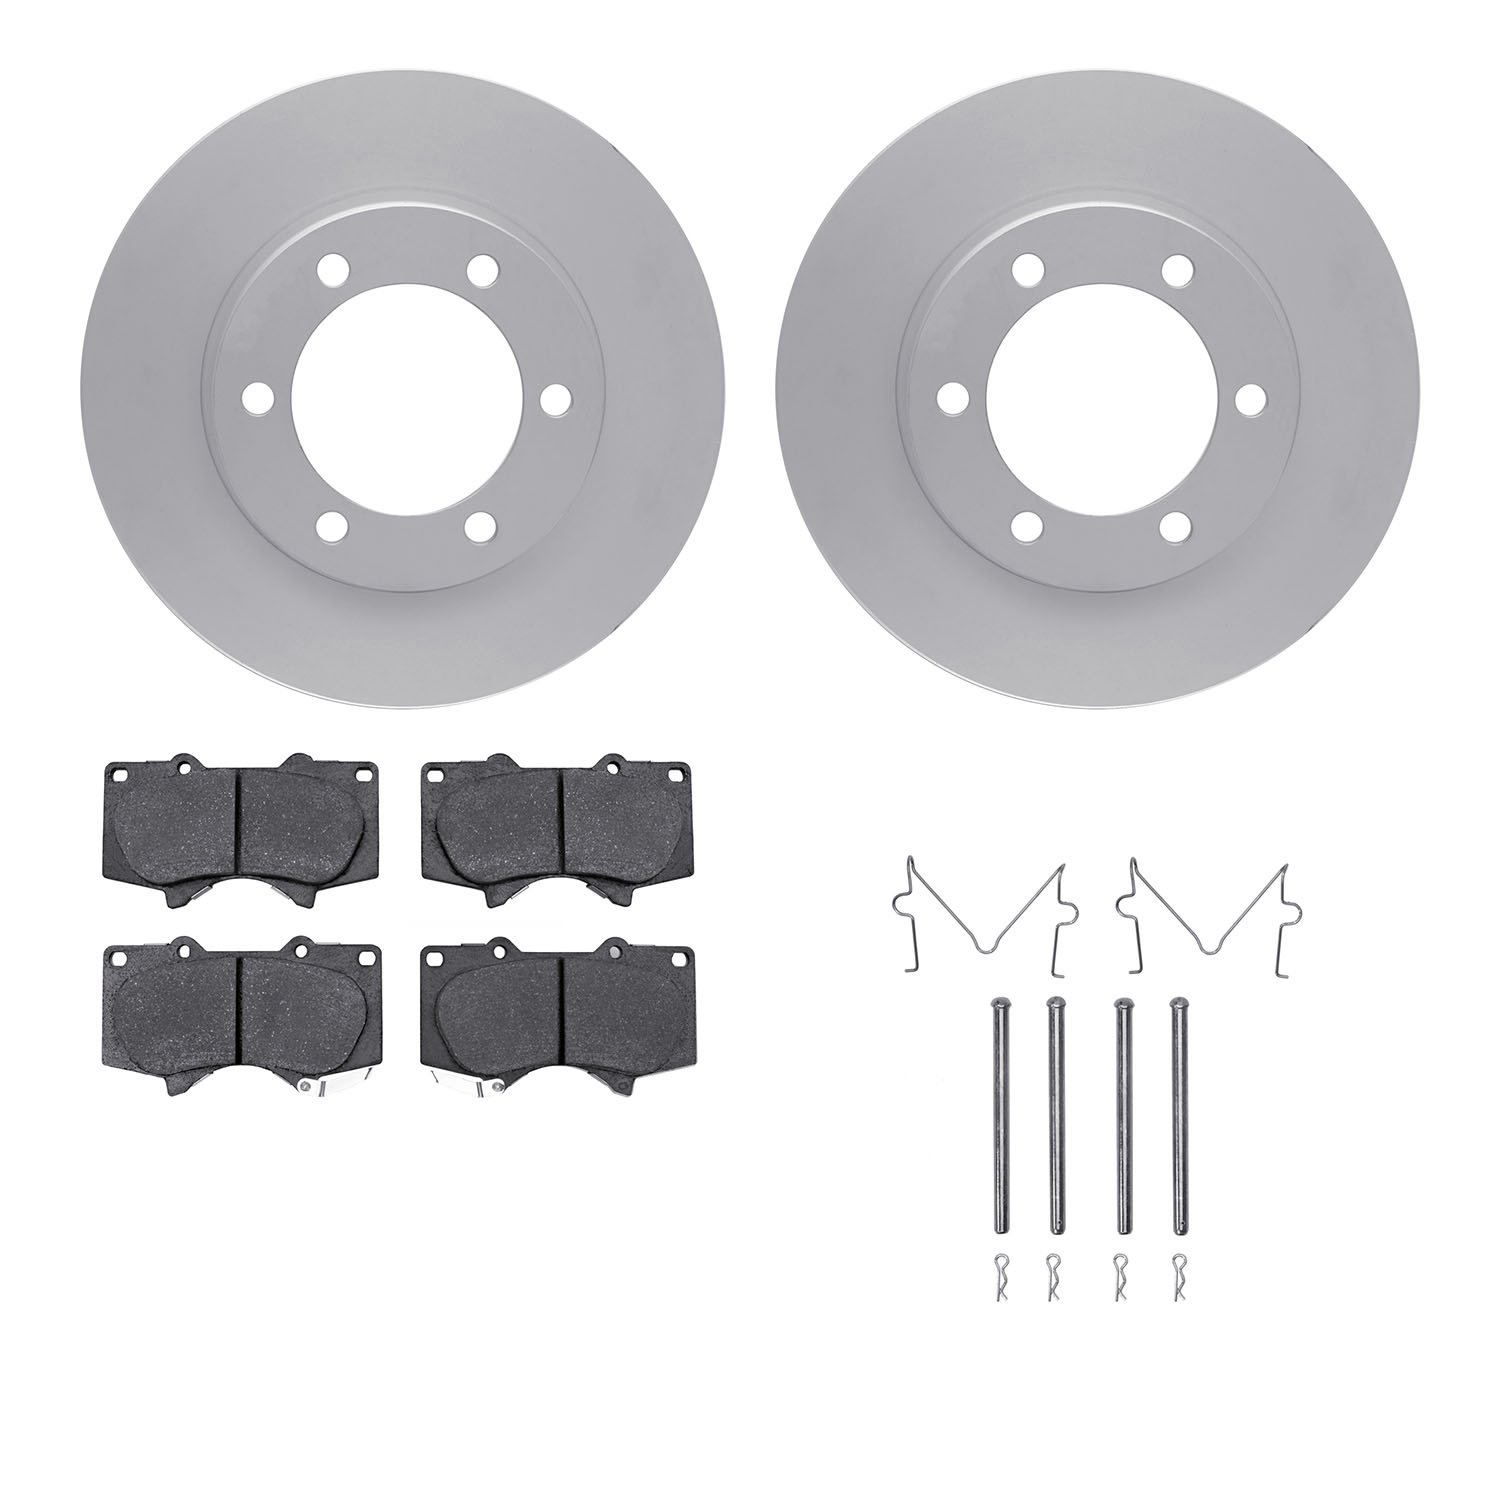 4412-76008 Geospec Brake Rotors with Ultimate-Duty Brake Pads & Hardware, 2000-2007 Lexus/Toyota/Scion, Position: Front